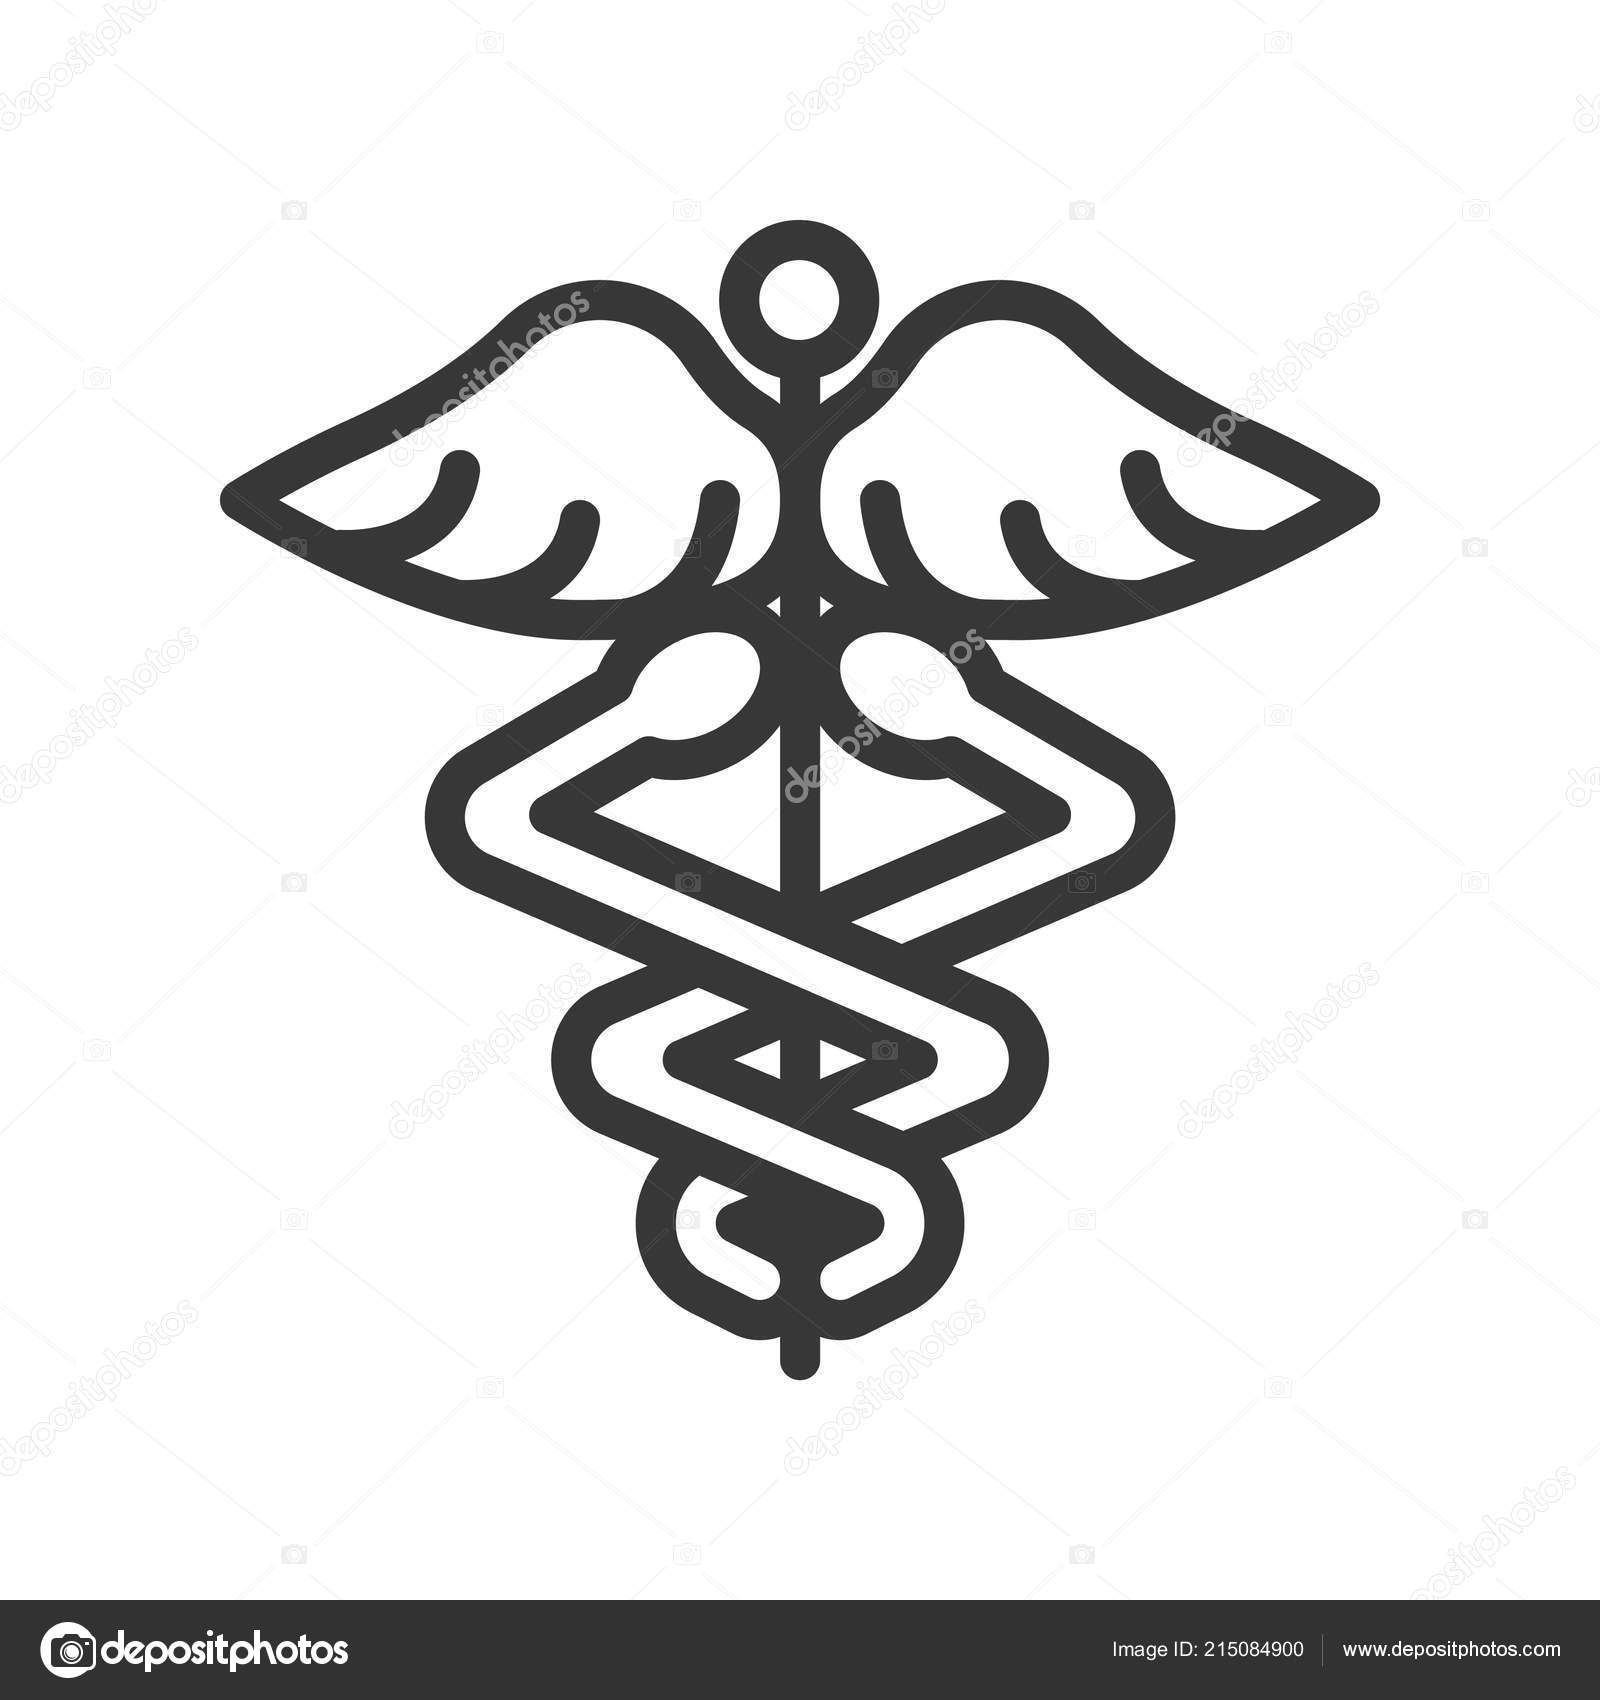 The Caduceus Isn't The Medical Symbol You Think It Is | Art & Object